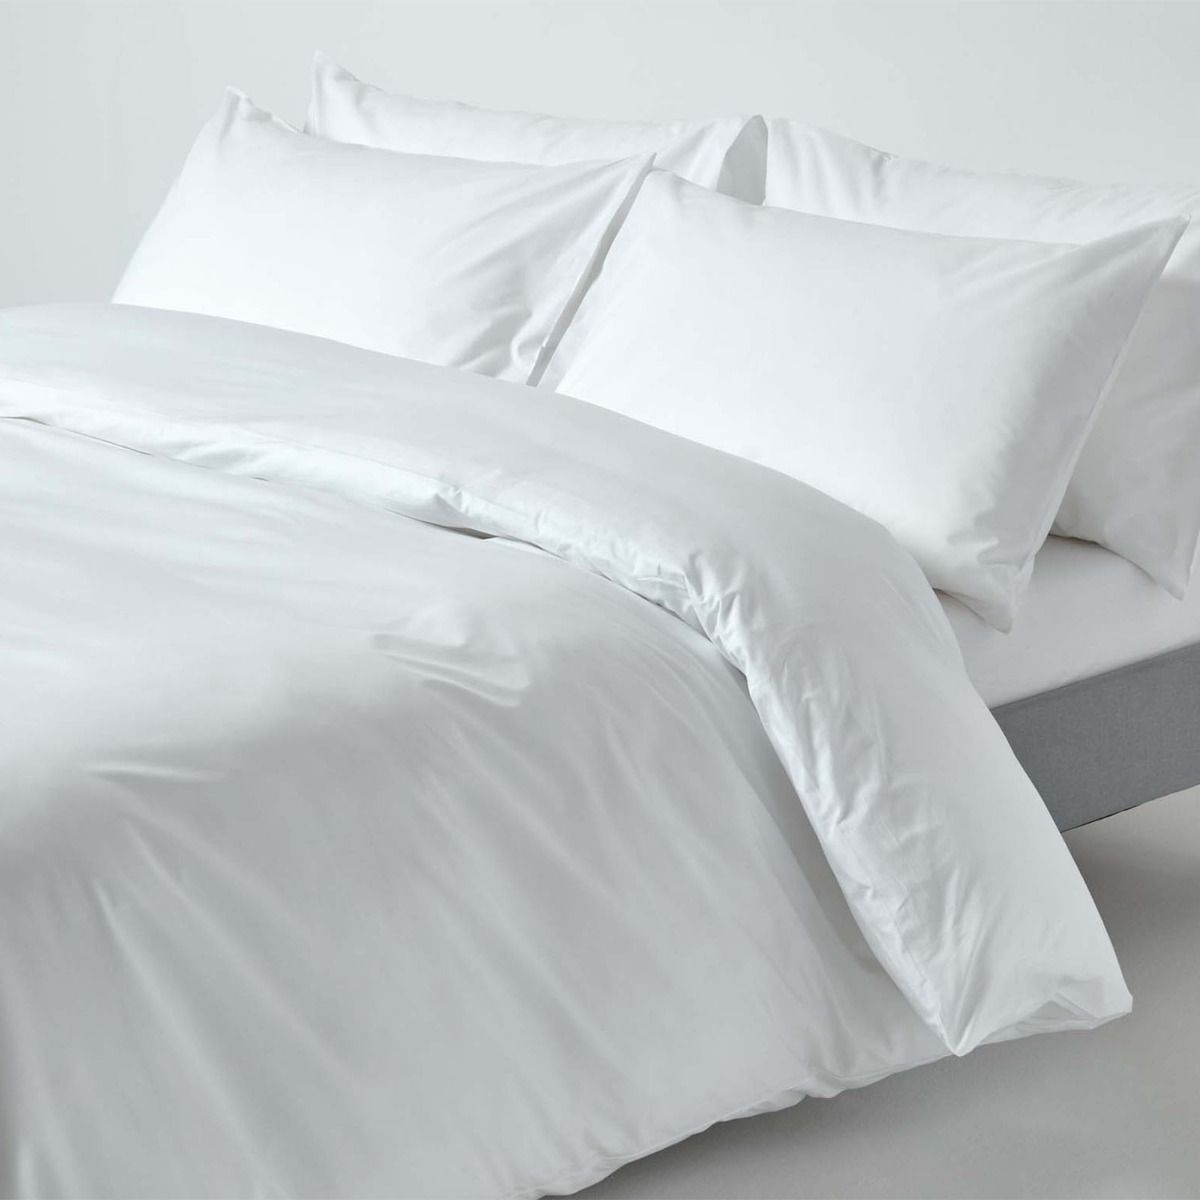 GUEST ROOM - DUVET COVER - TWIN